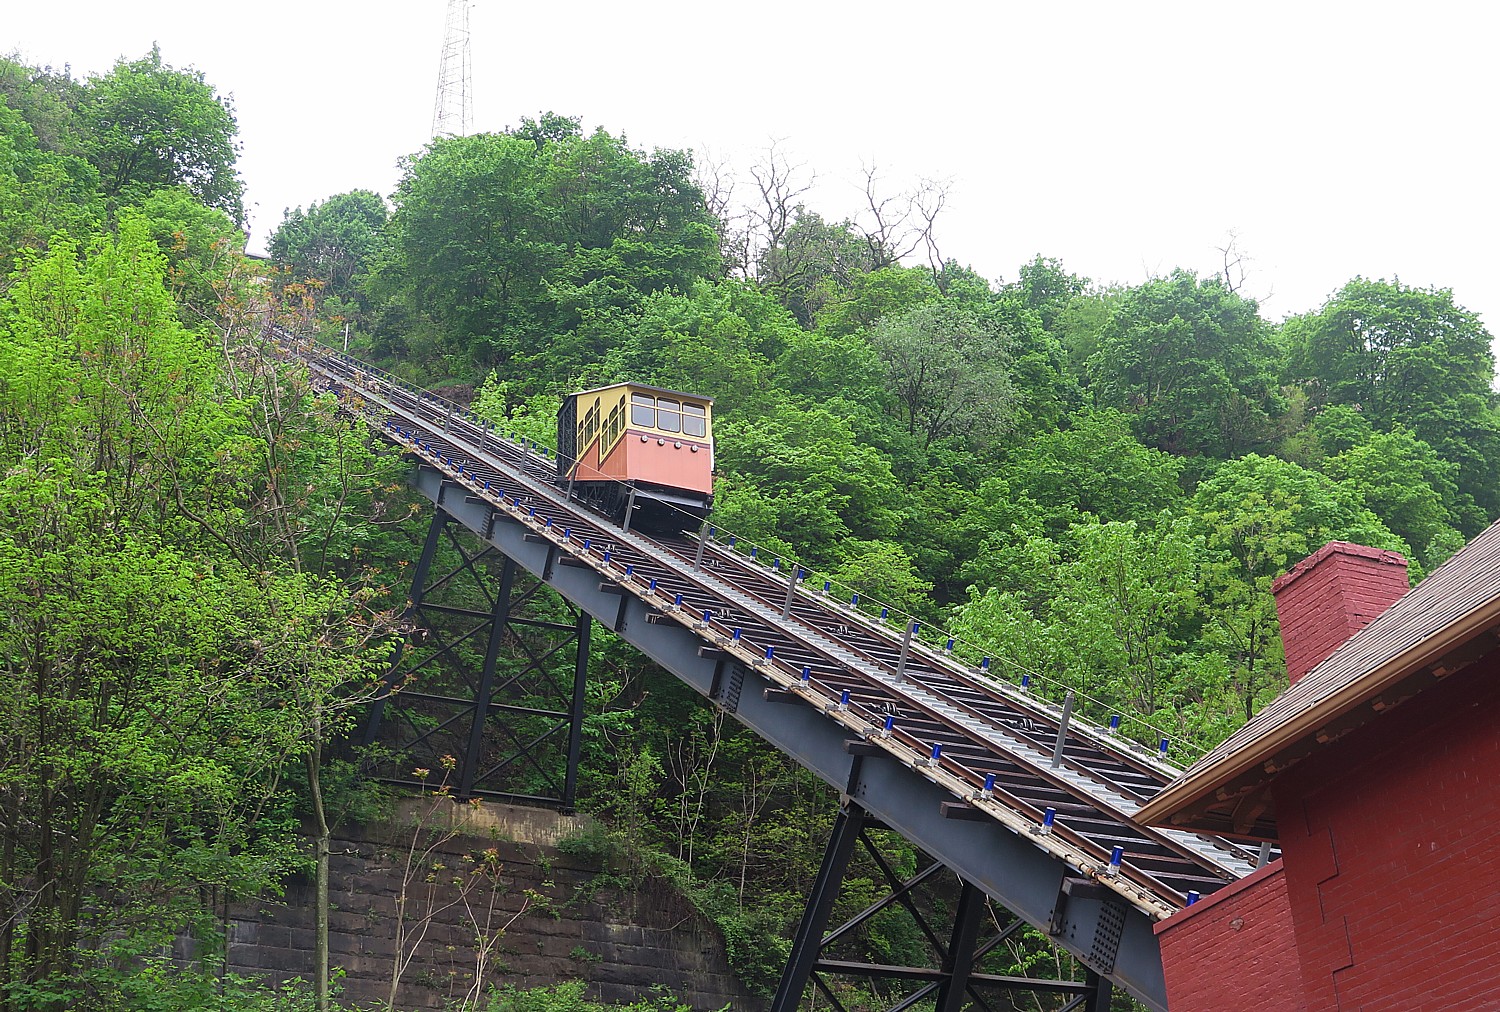 The Monongahela Incline originally opened in 1870 (refurbished in 2015) and is the nation’s oldest cable car operation © 2016 Karen Rubin/goingplacesfarandnear.com